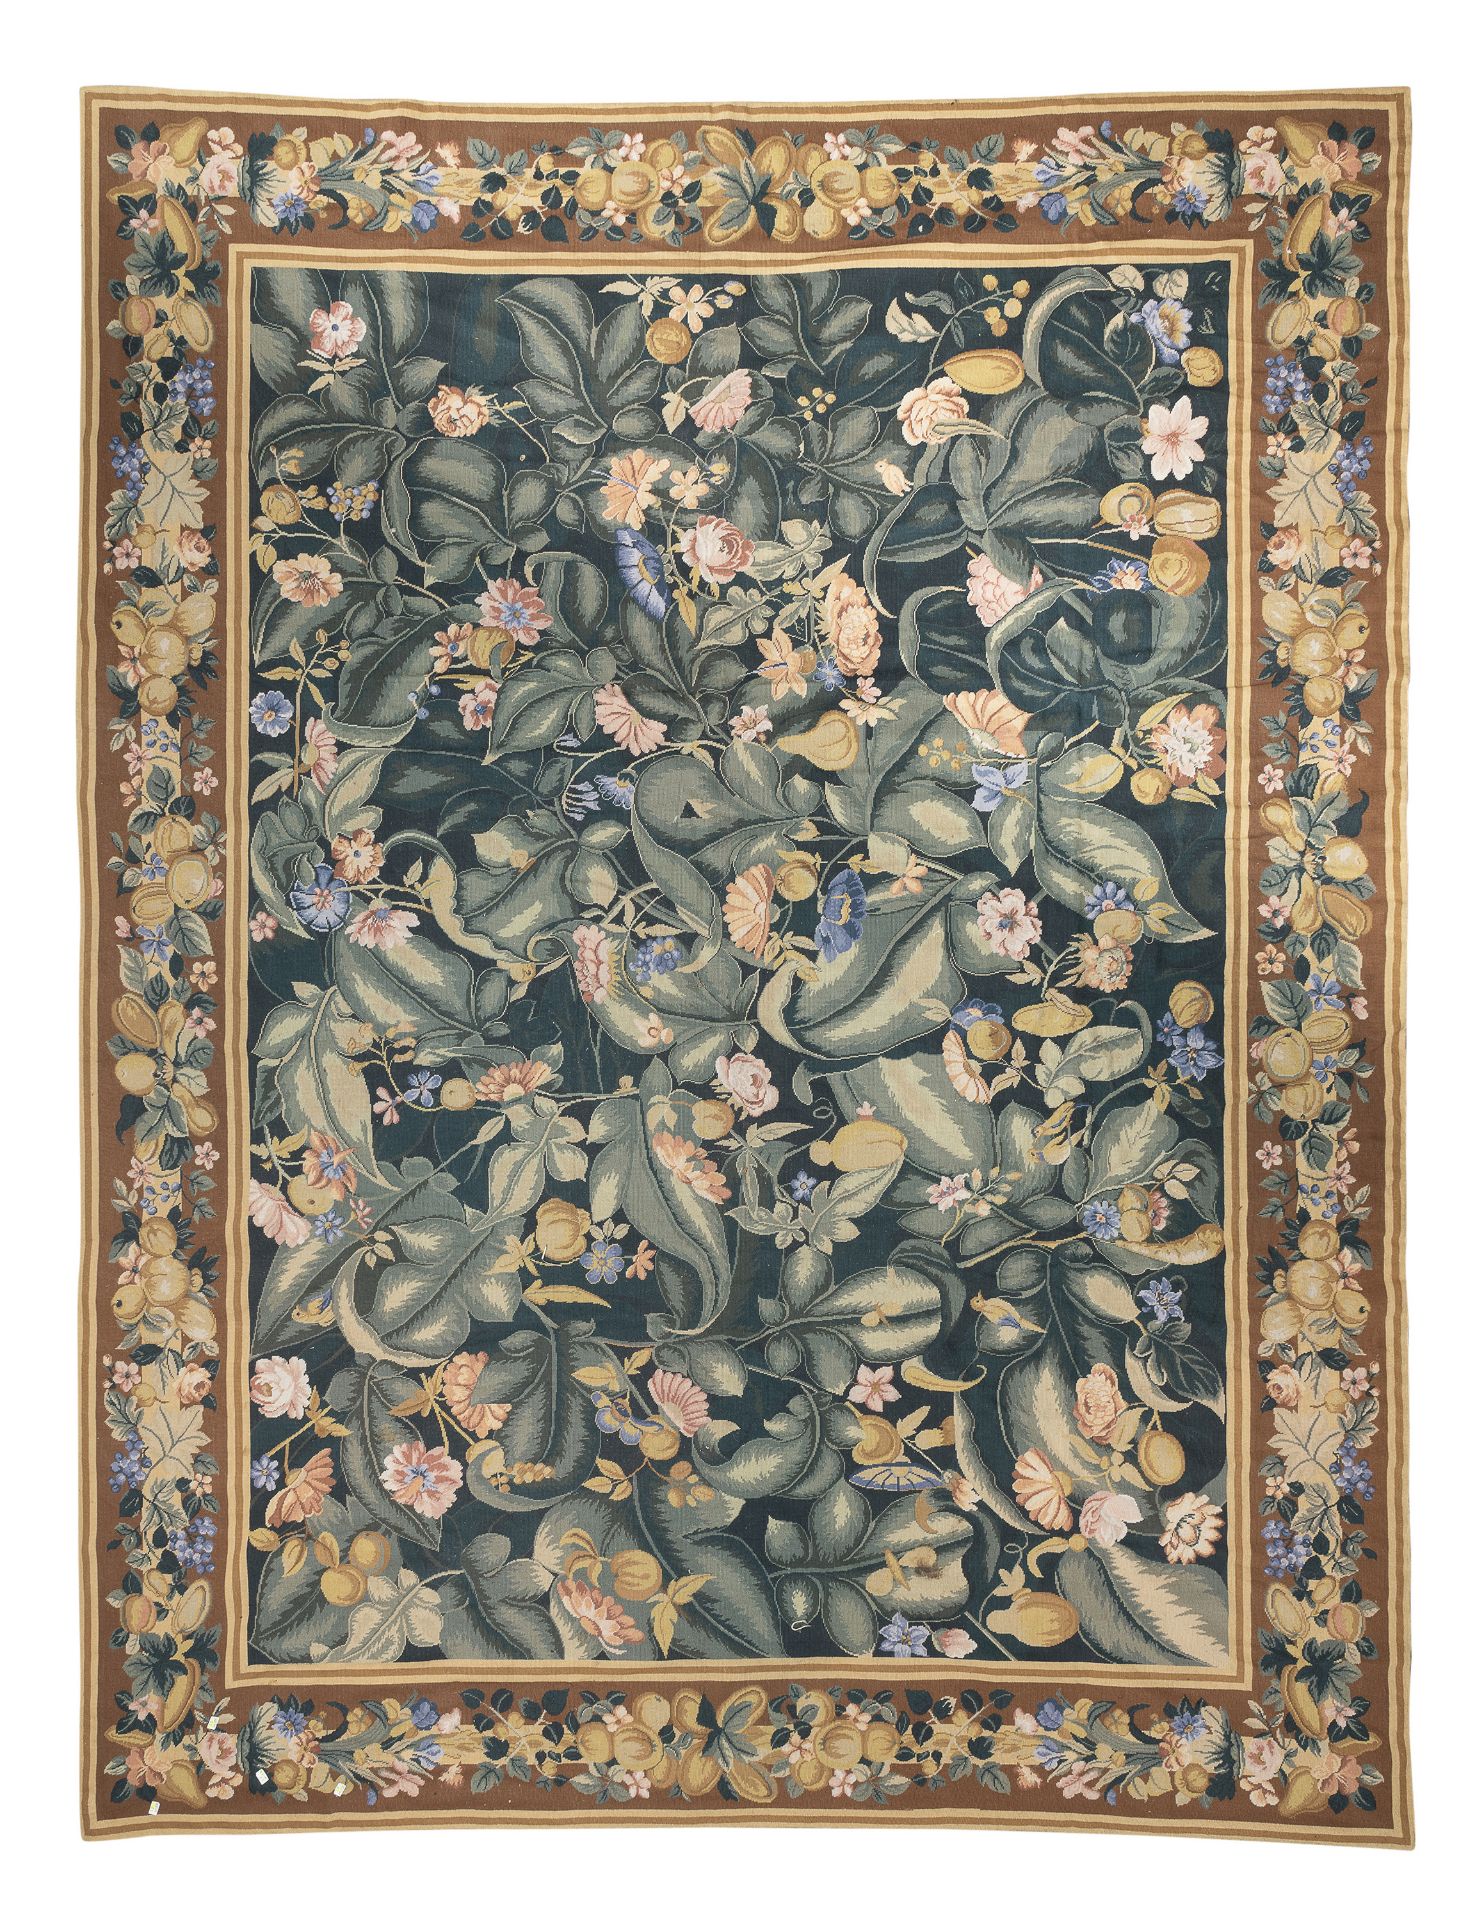 SMALL POINT TAPESTRY FRANCE EARLY 20TH CENTURY